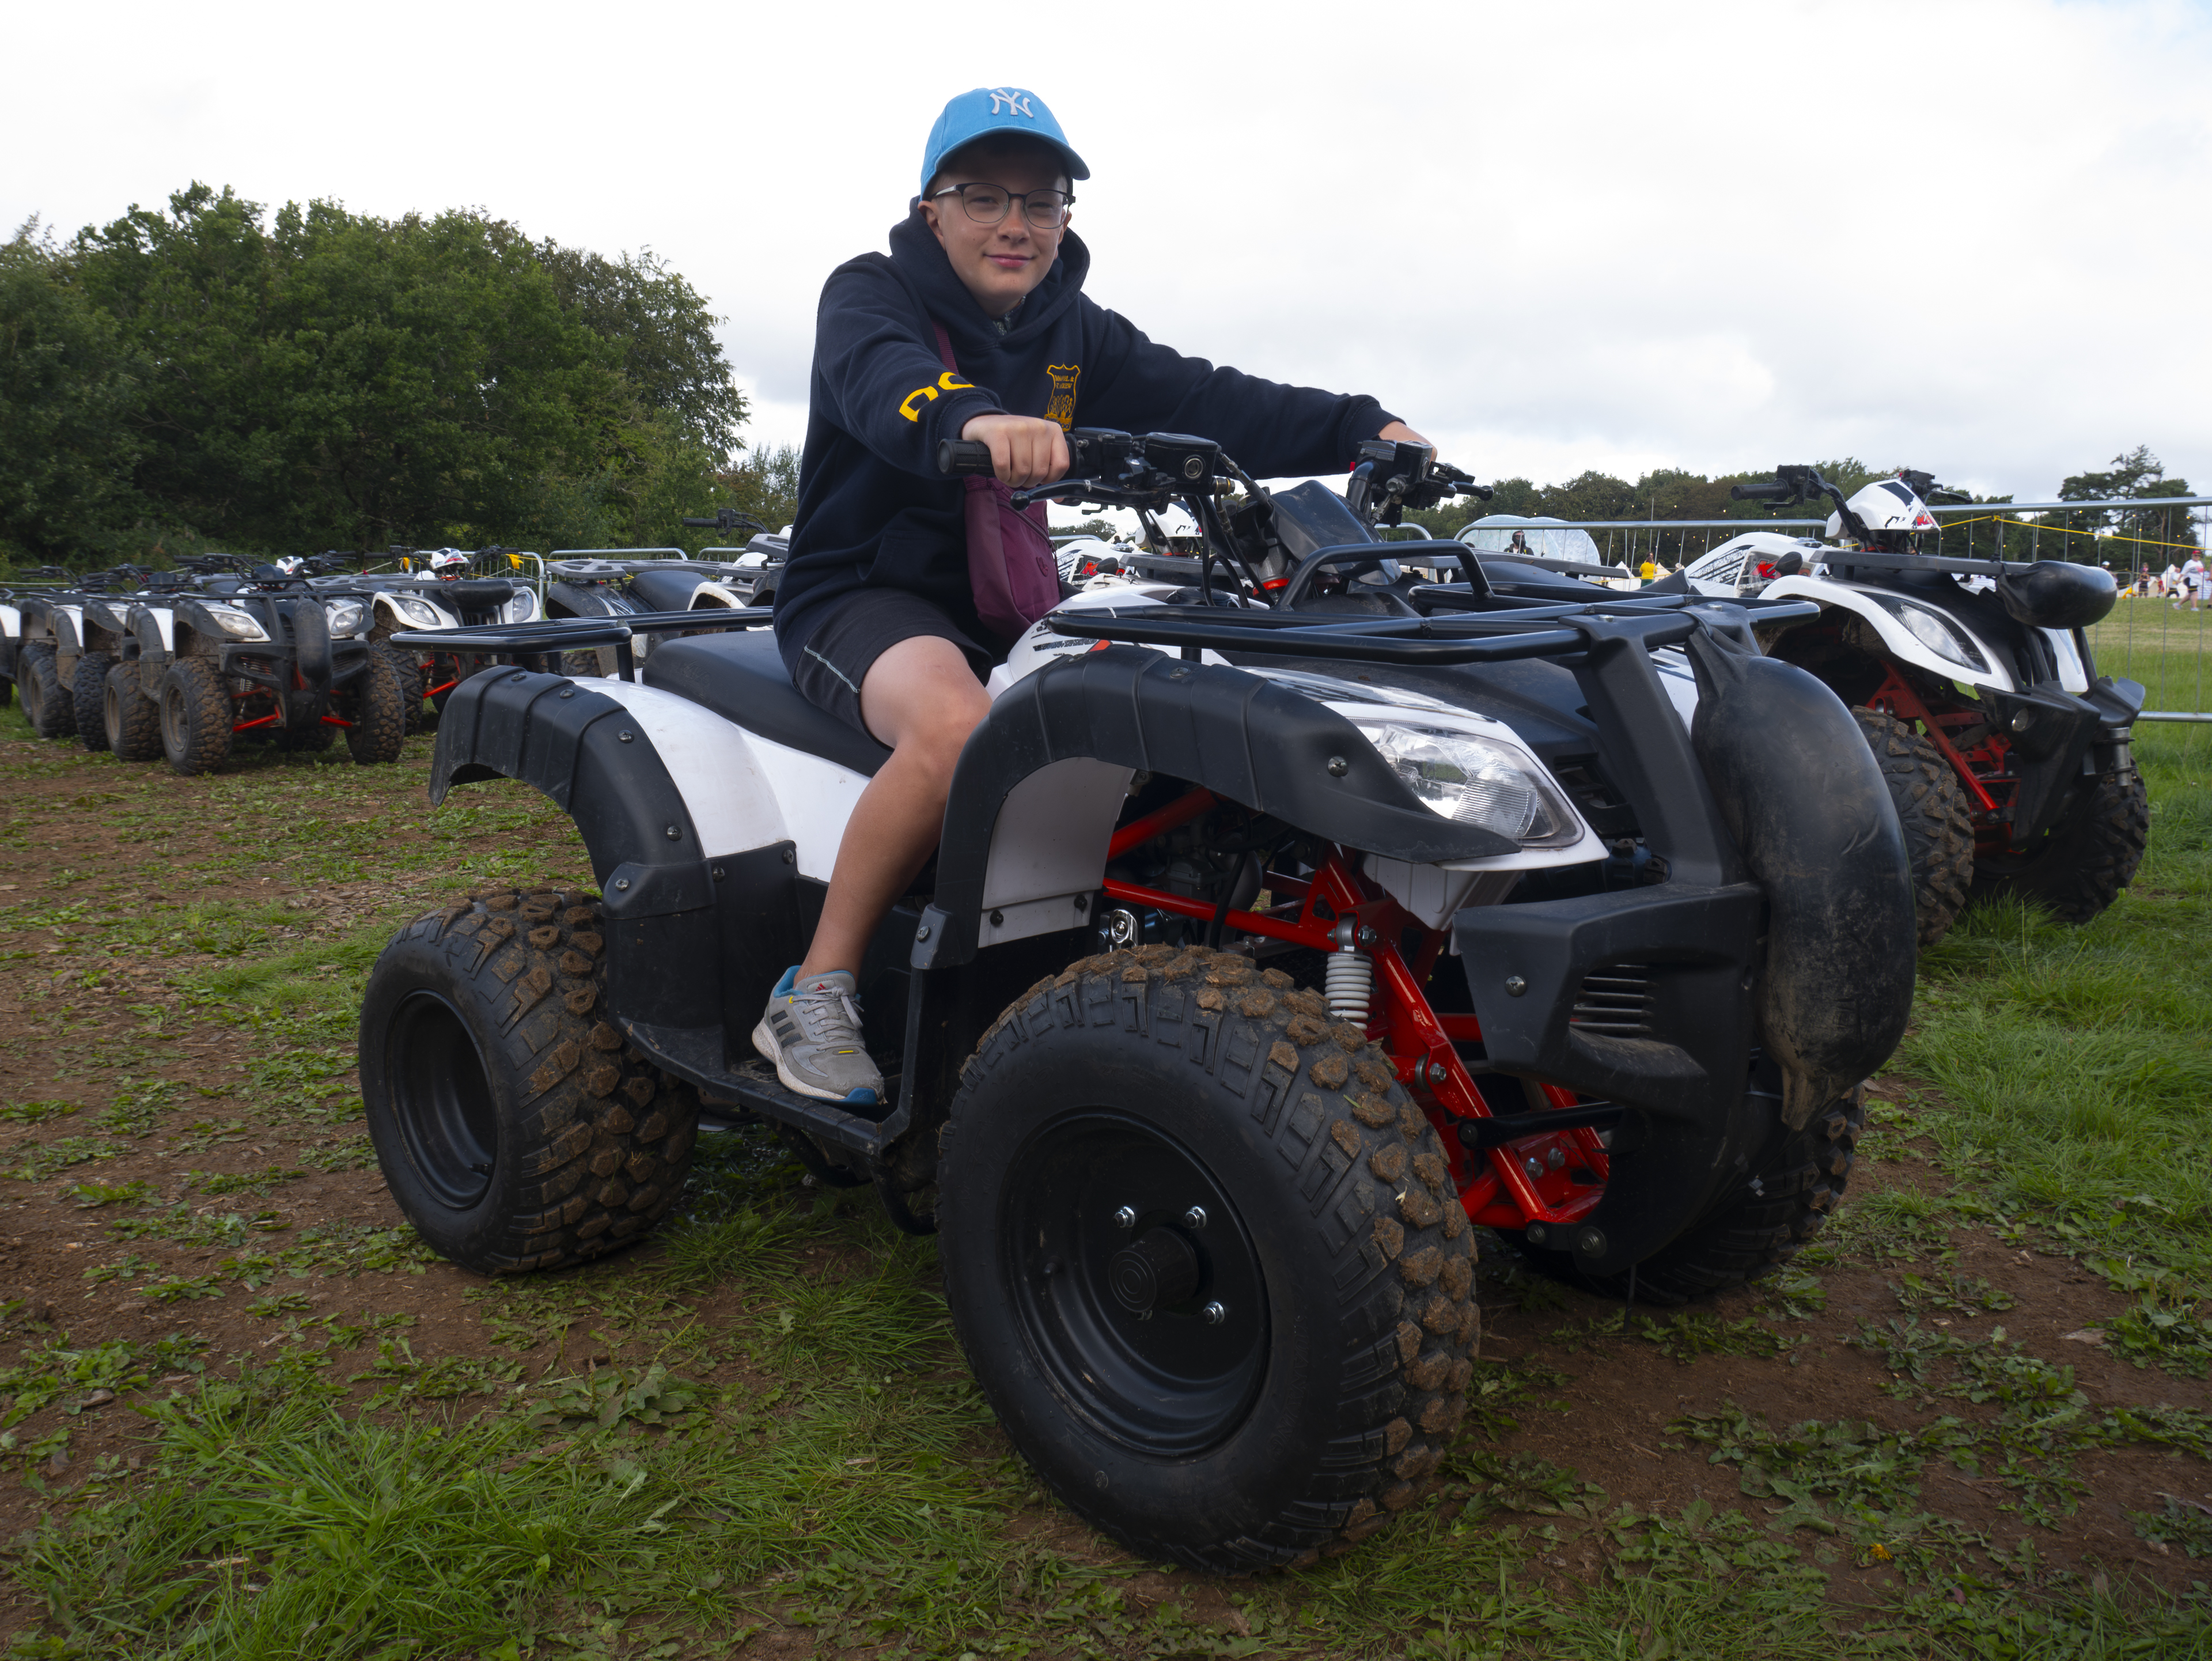 Other activities at Camp Kindling include quad-biking and zorbing